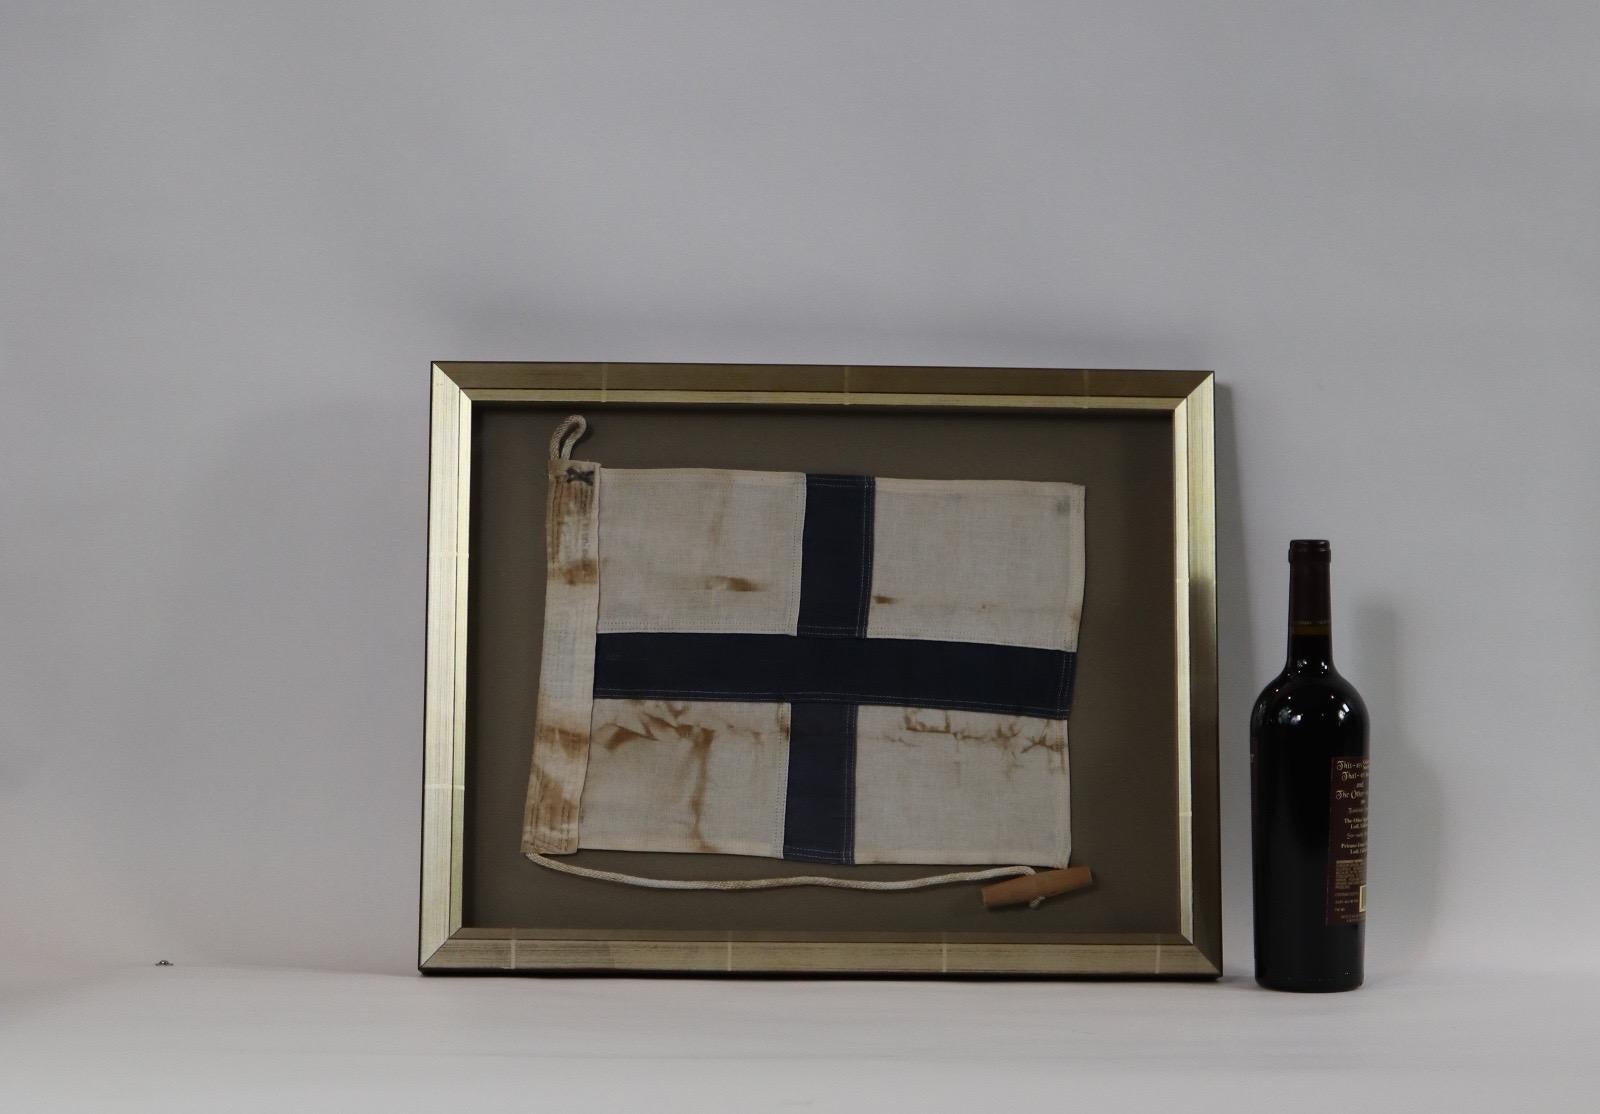 Shadow box framed ships signal flag with attached rope and wood toggle. White and red field. Weight is 5 pounds.